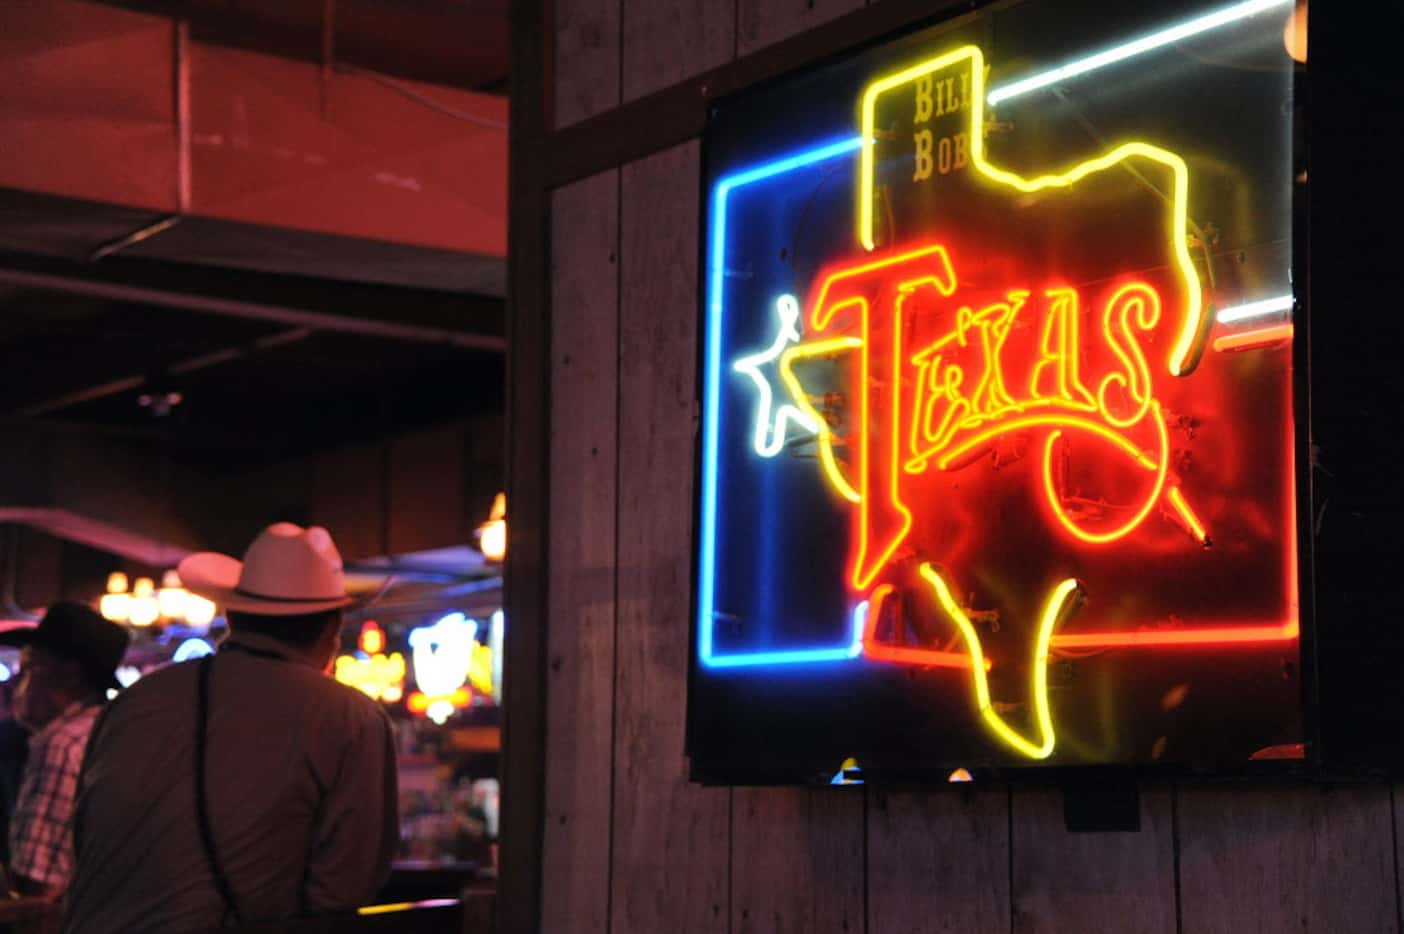 Opened in 1981, Billy Bob's is billed as "The World's Largest Honky Tonk," spanning 127,000...